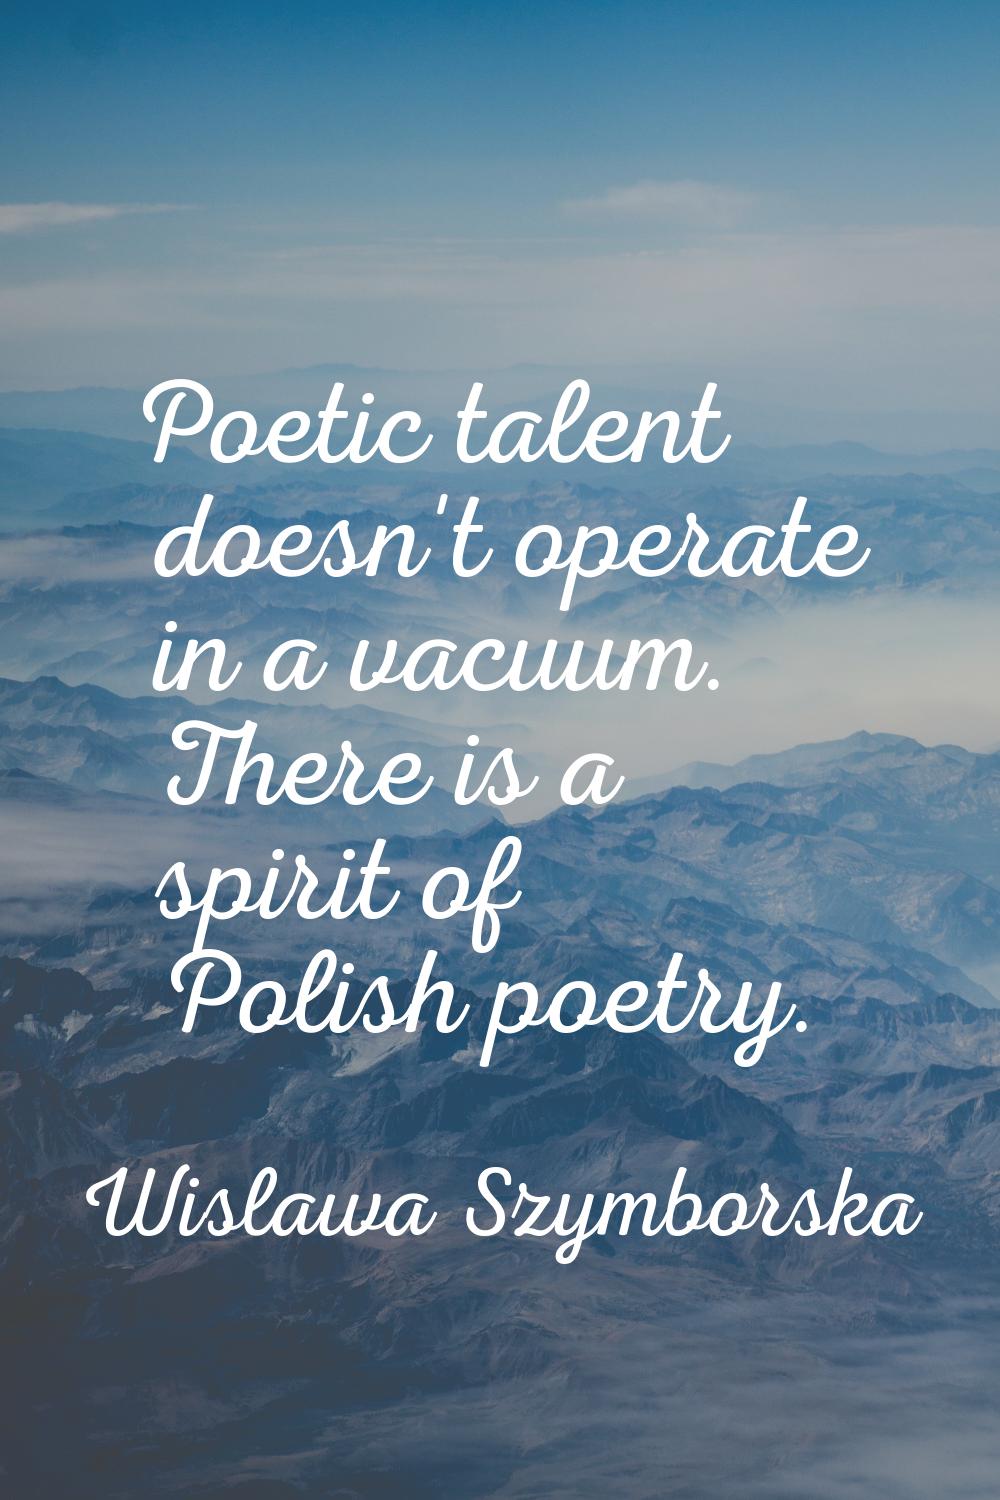 Poetic talent doesn't operate in a vacuum. There is a spirit of Polish poetry.